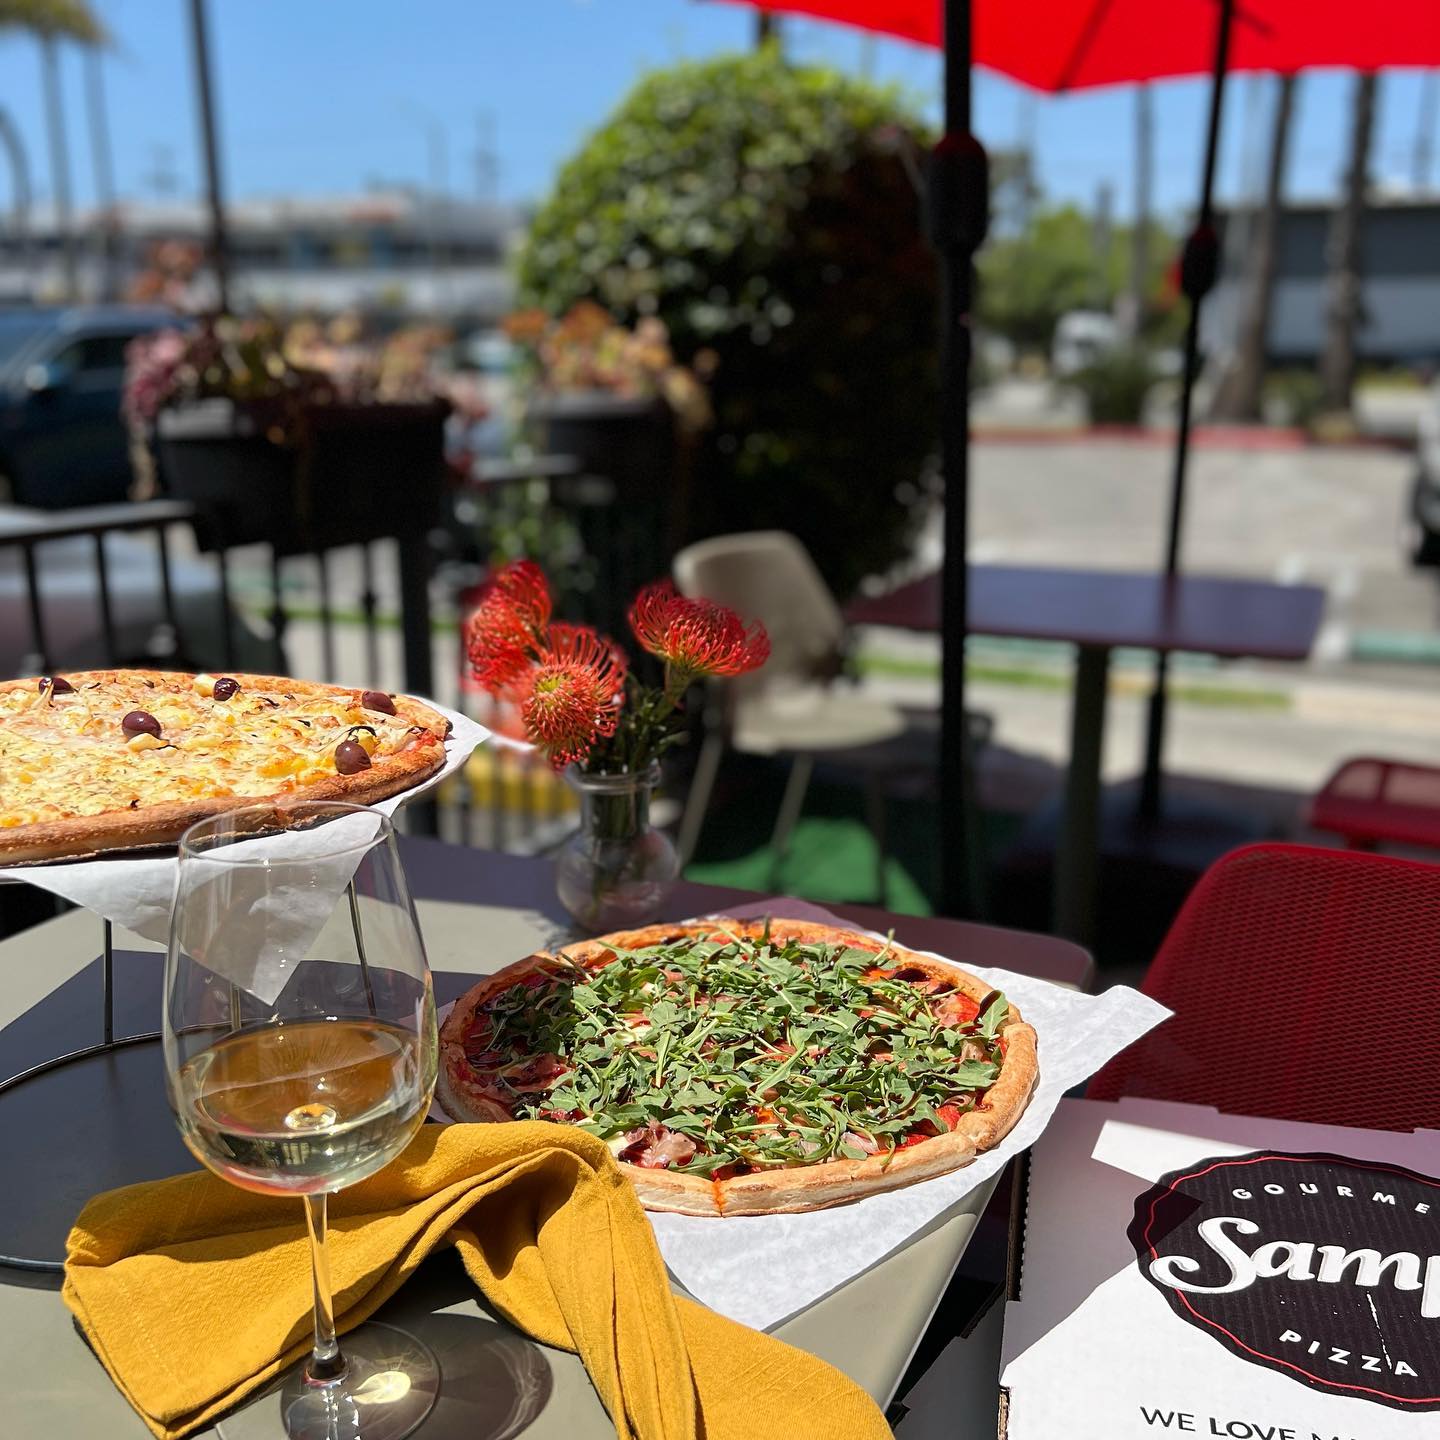 Sampas pizza cafe patio table outside with pizza